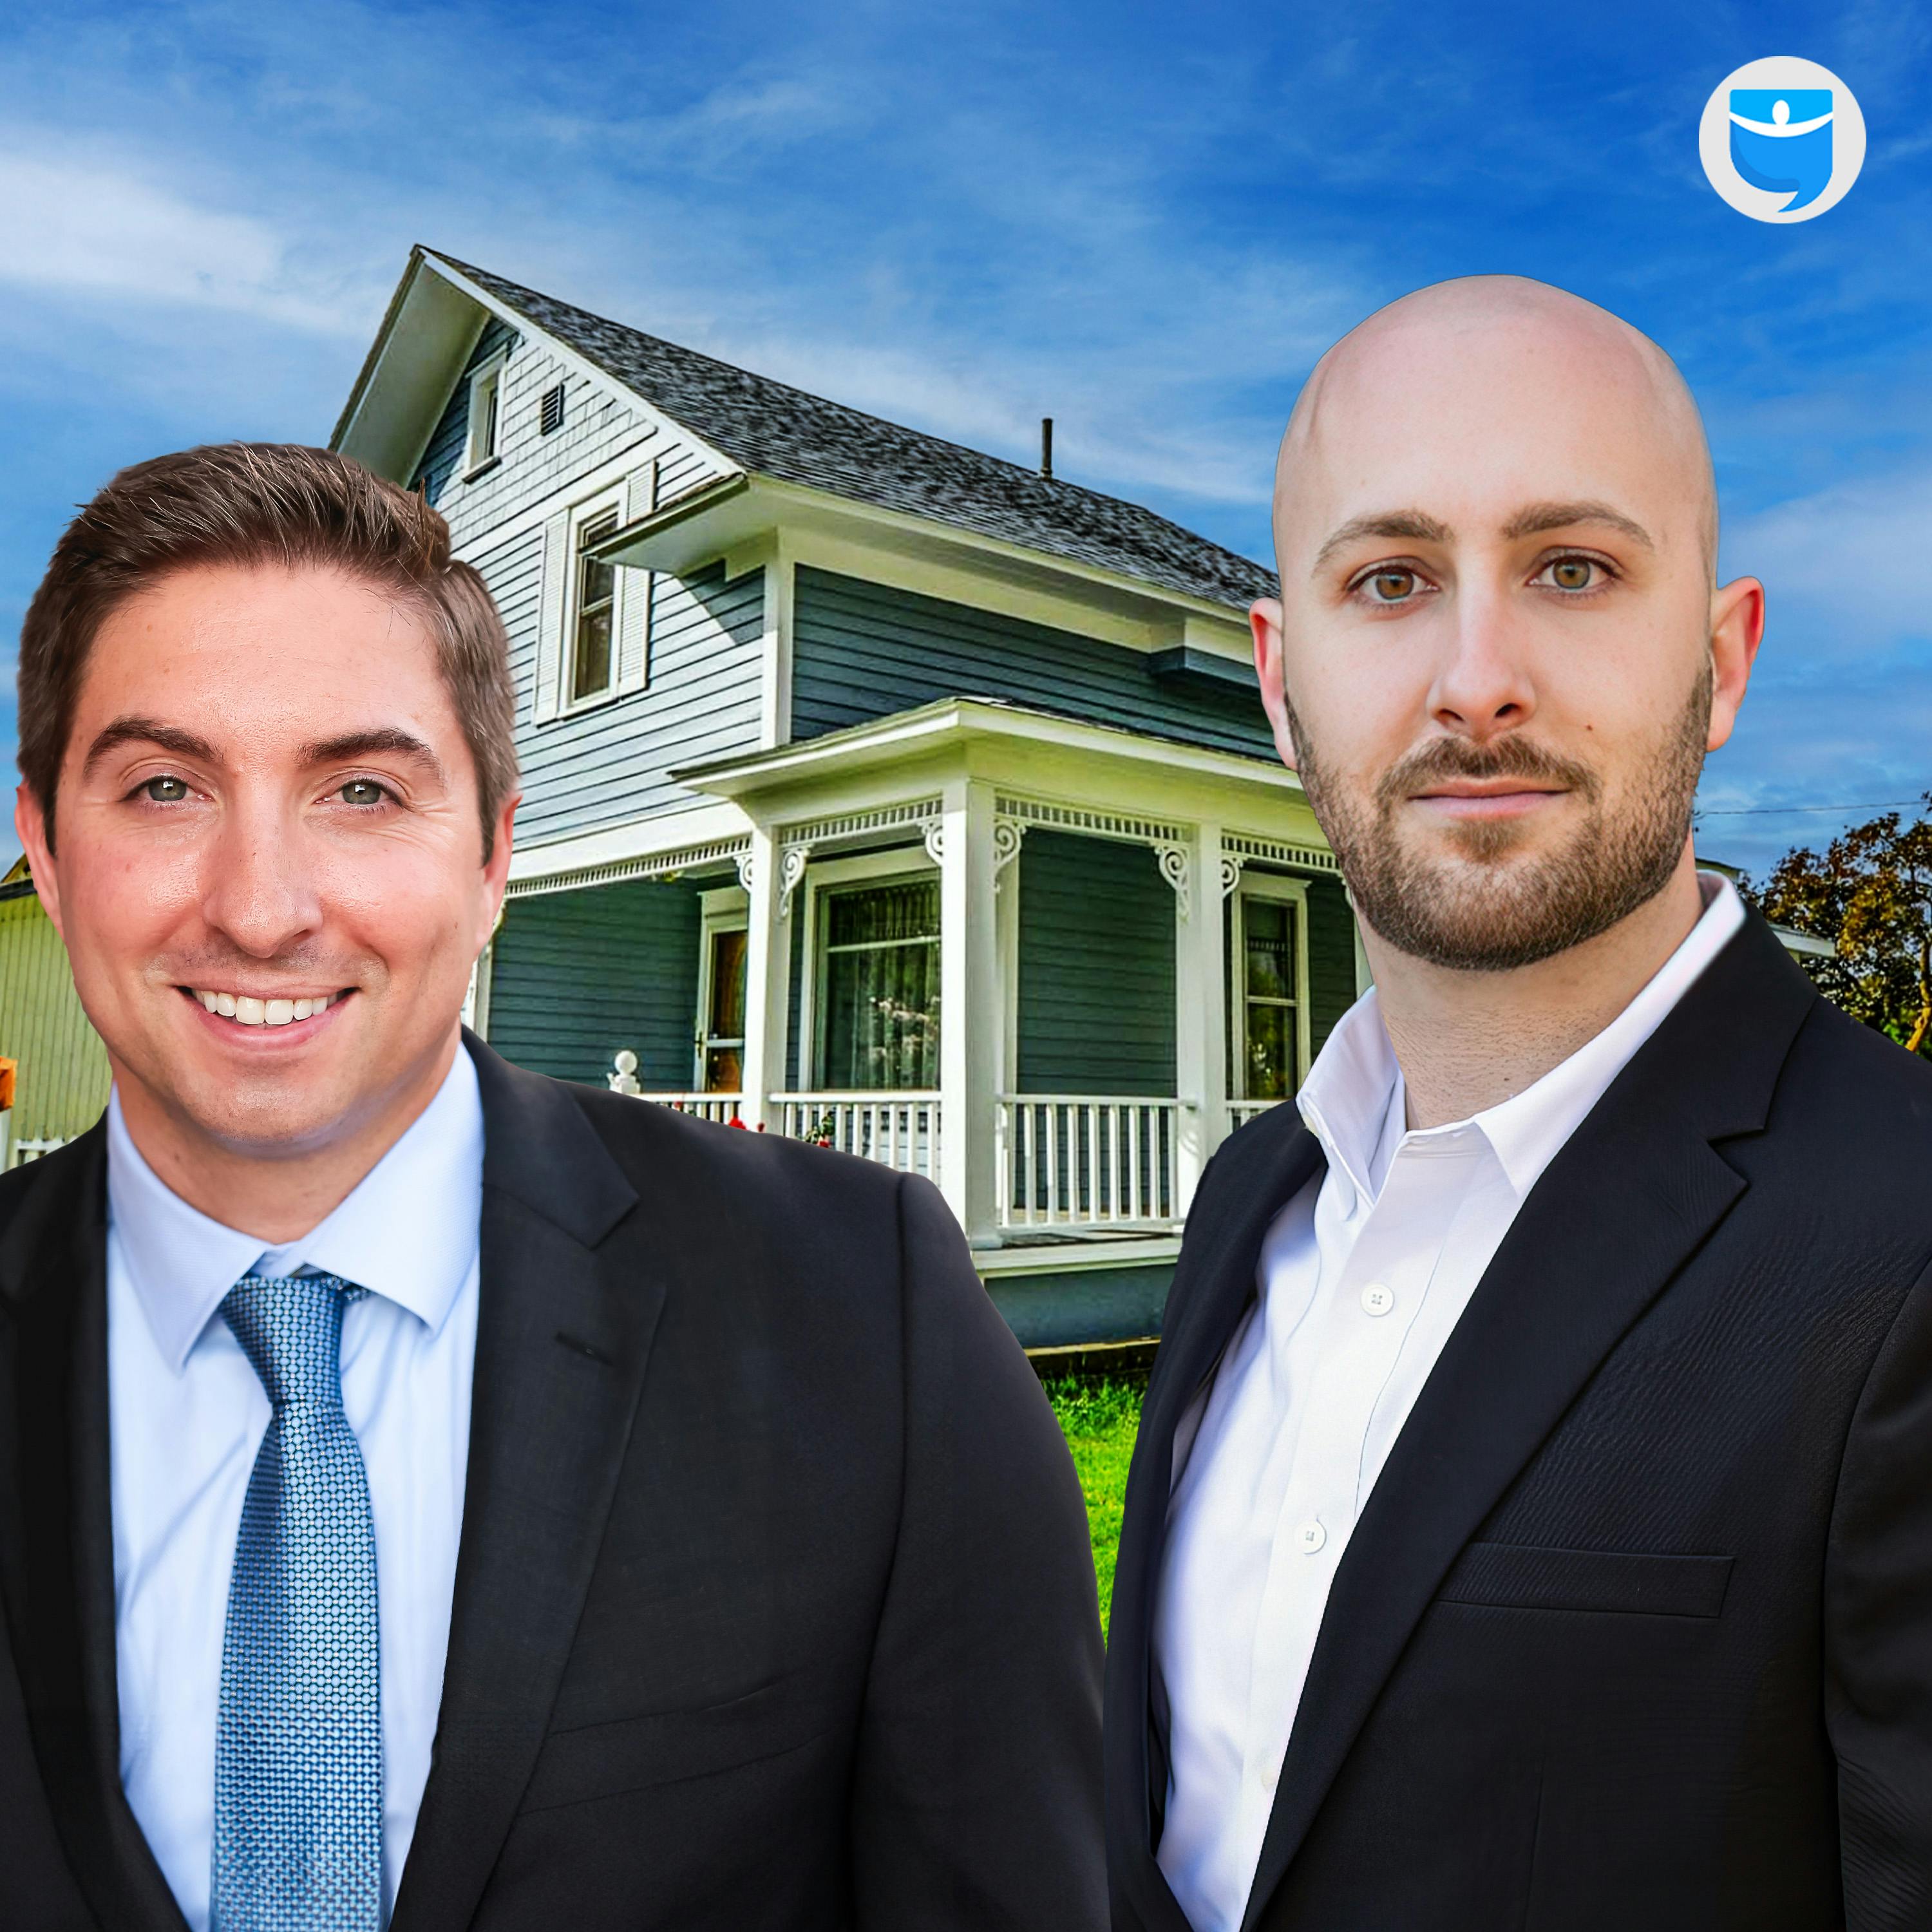 805: 2 “Cash Flow” Housing Markets That Are On Track for Big Growth w/Brandon Ribeiro and Peter Stewart